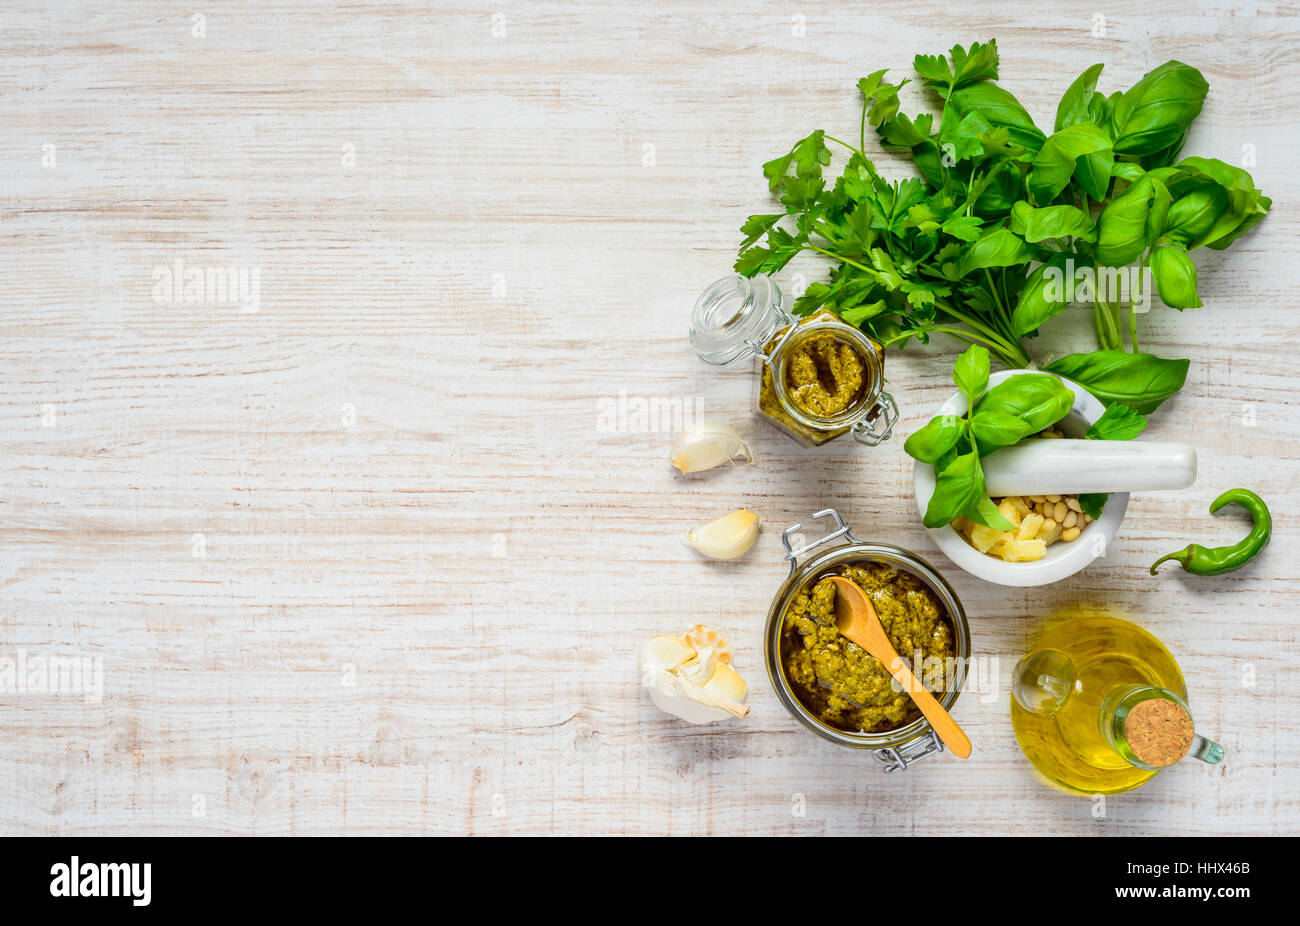 Top View of Pest in Jar with Fresh Green Herbs and Cooking Ingredients and on Copy Space Area Stock Photo